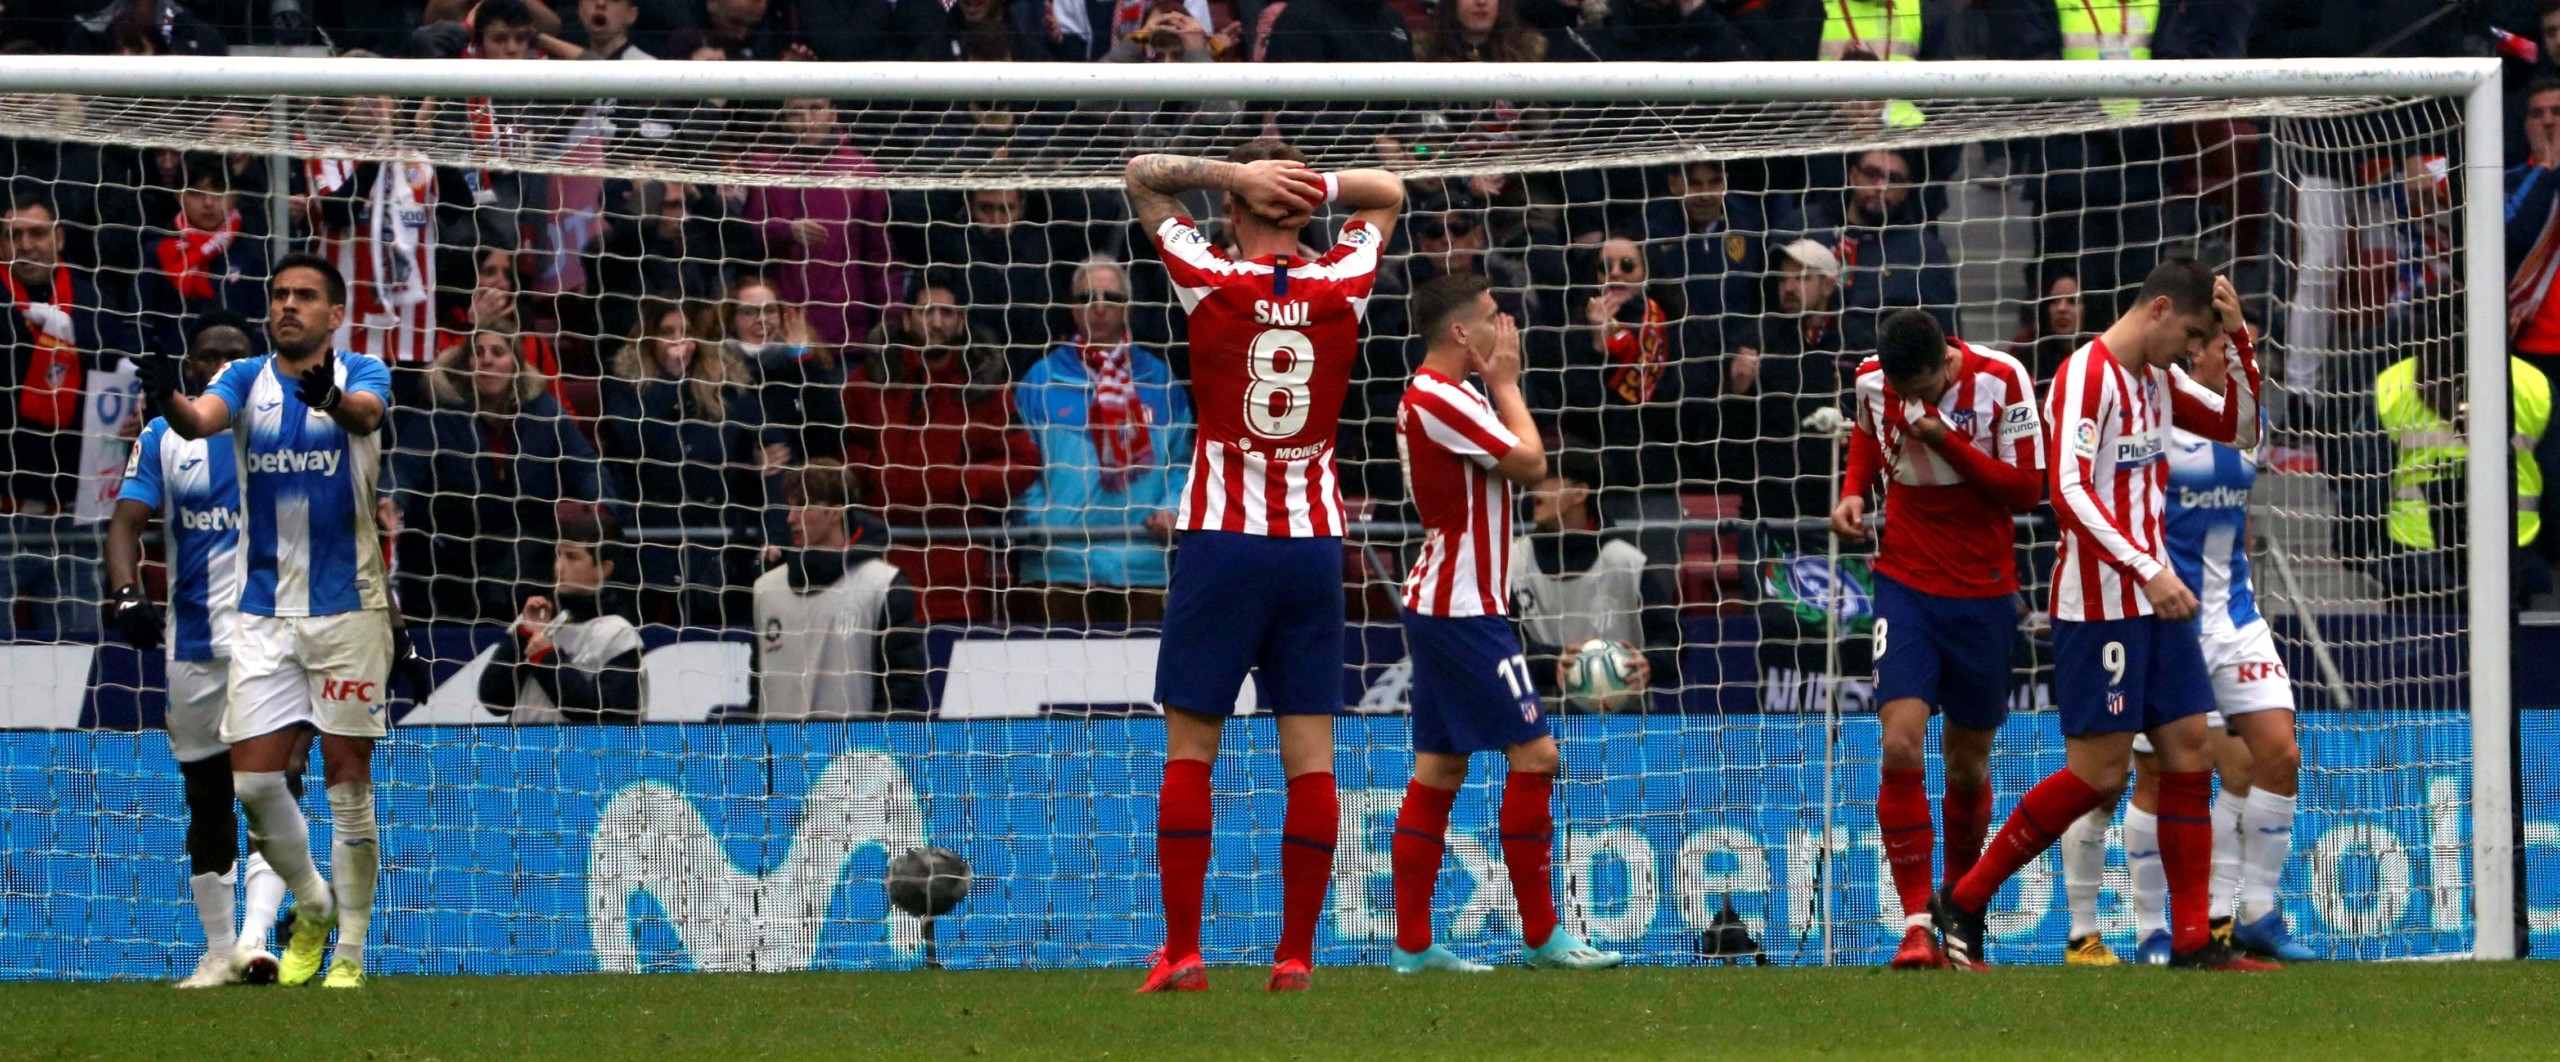 Weekly La Liga Roundup: Atlético's struggles, Valencia's unlikely form, and more